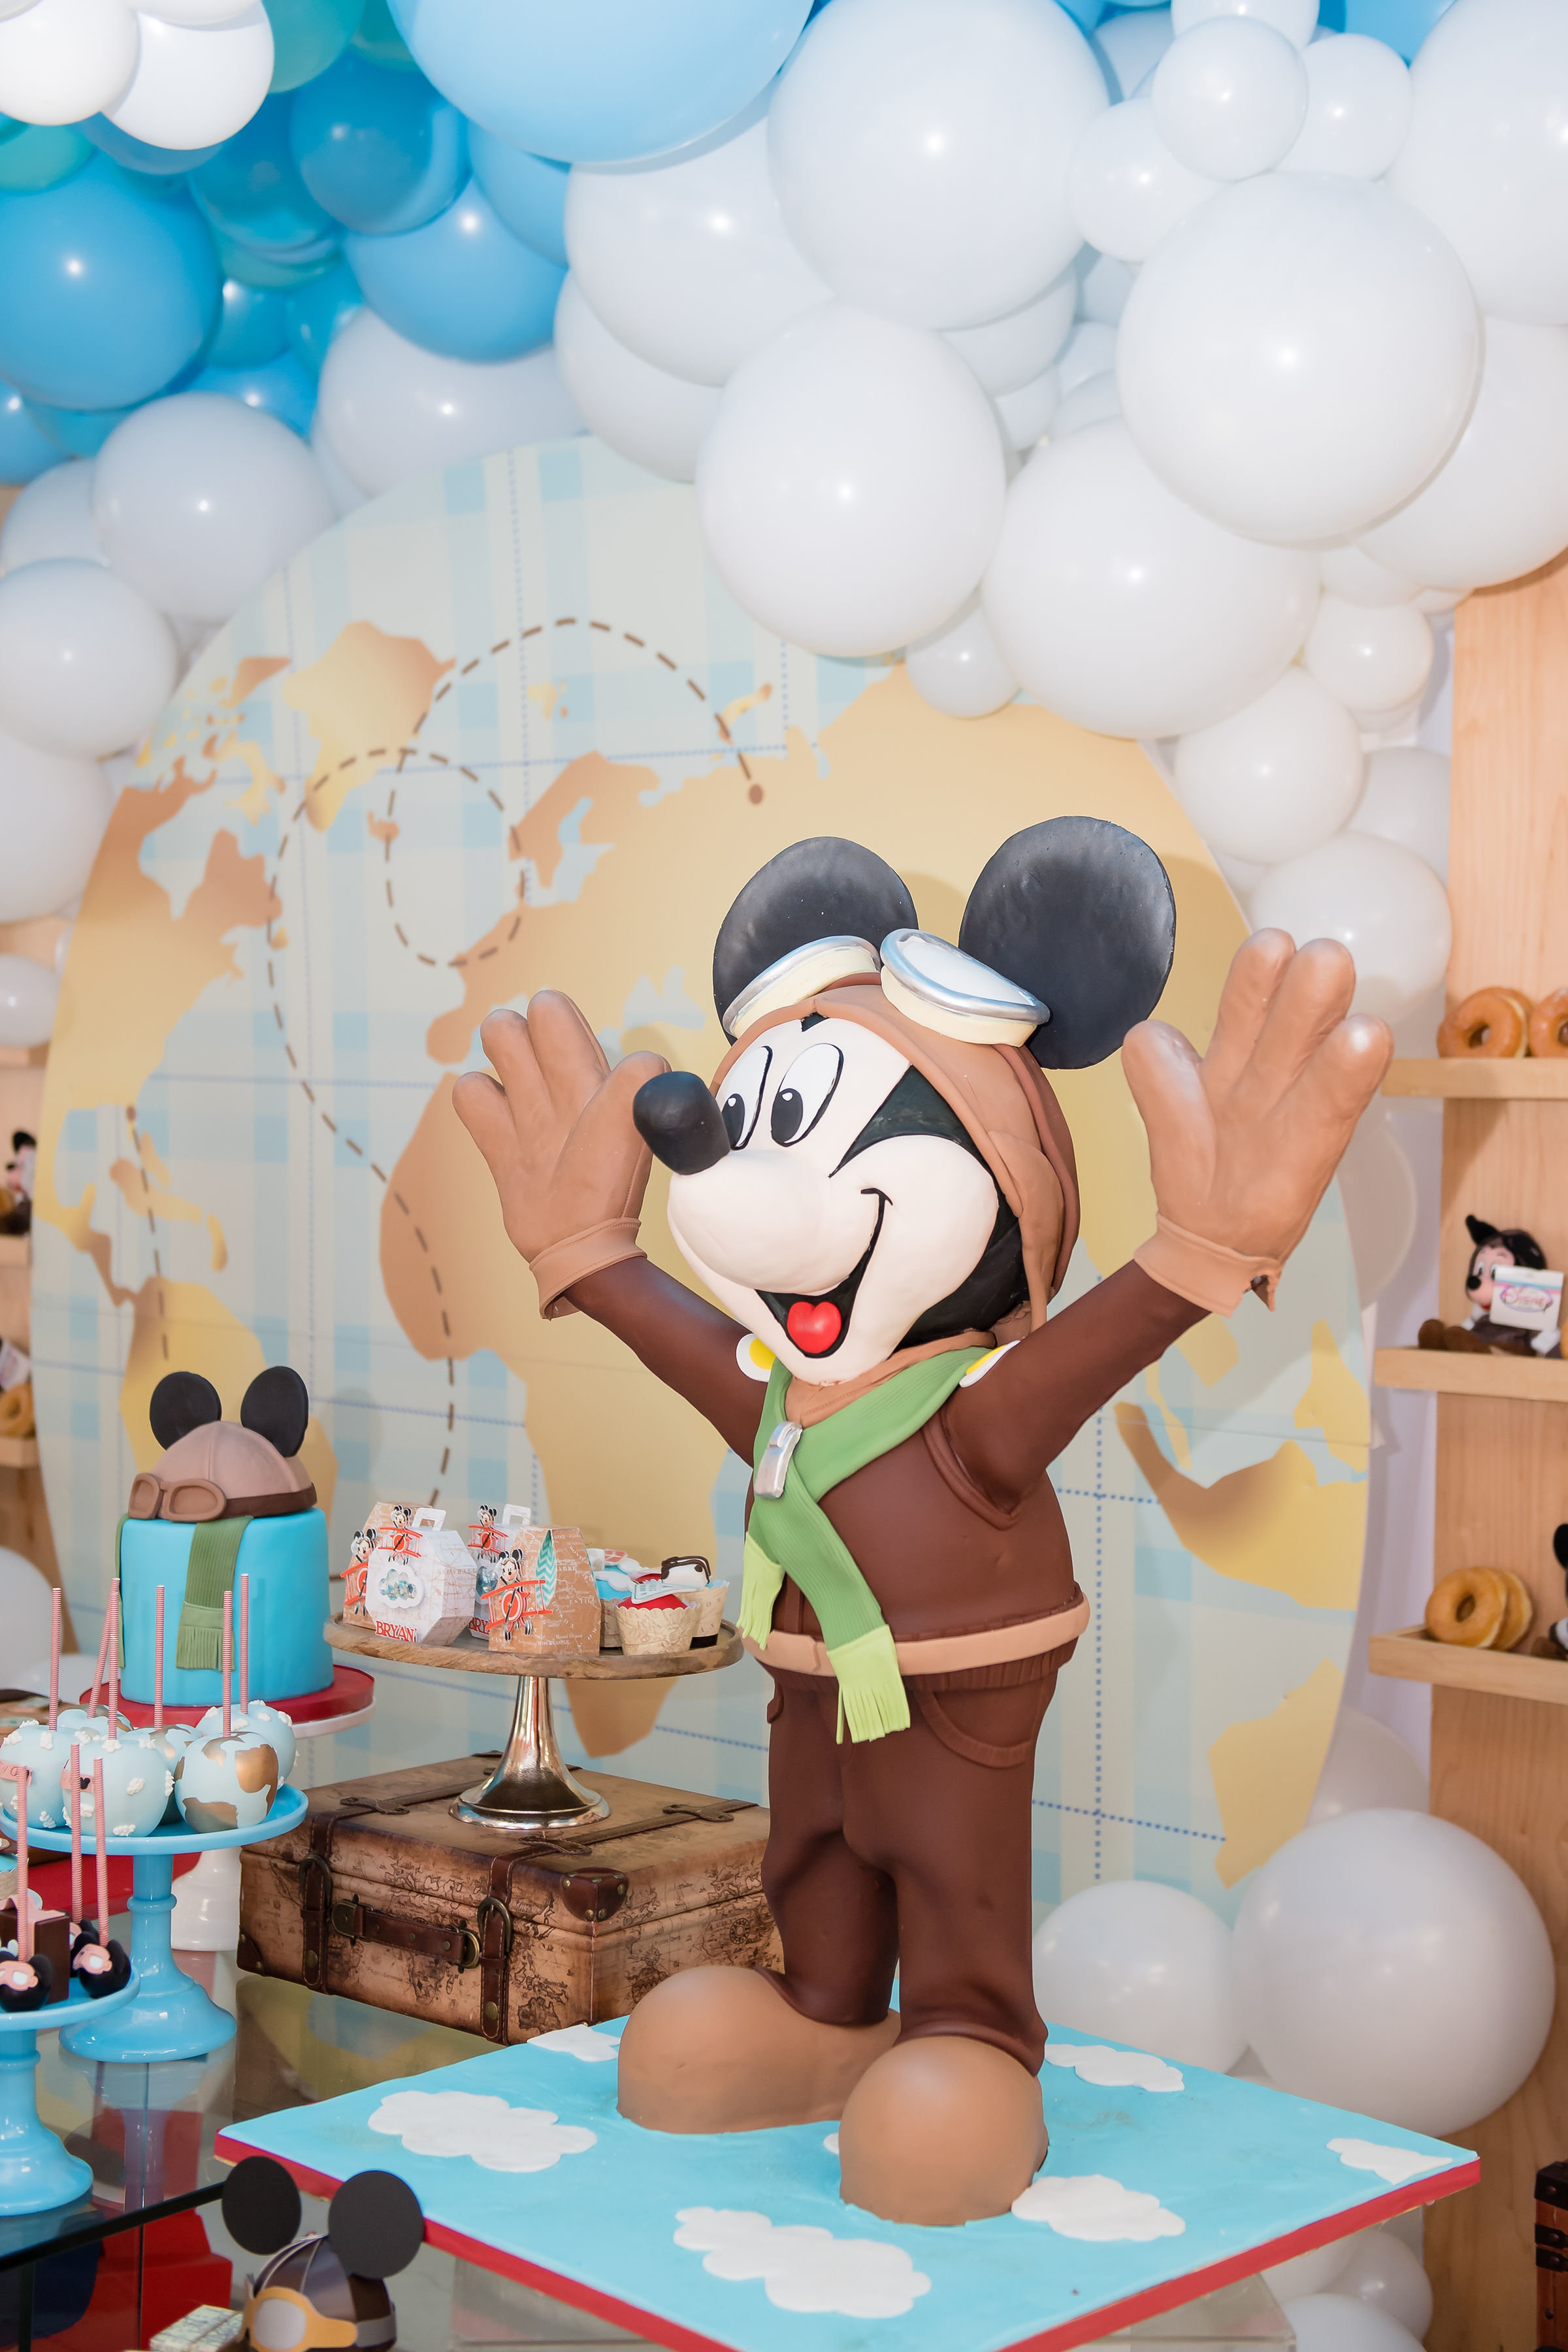 miami-event-planner-one-inspired-party-Mickey-Aviator-12